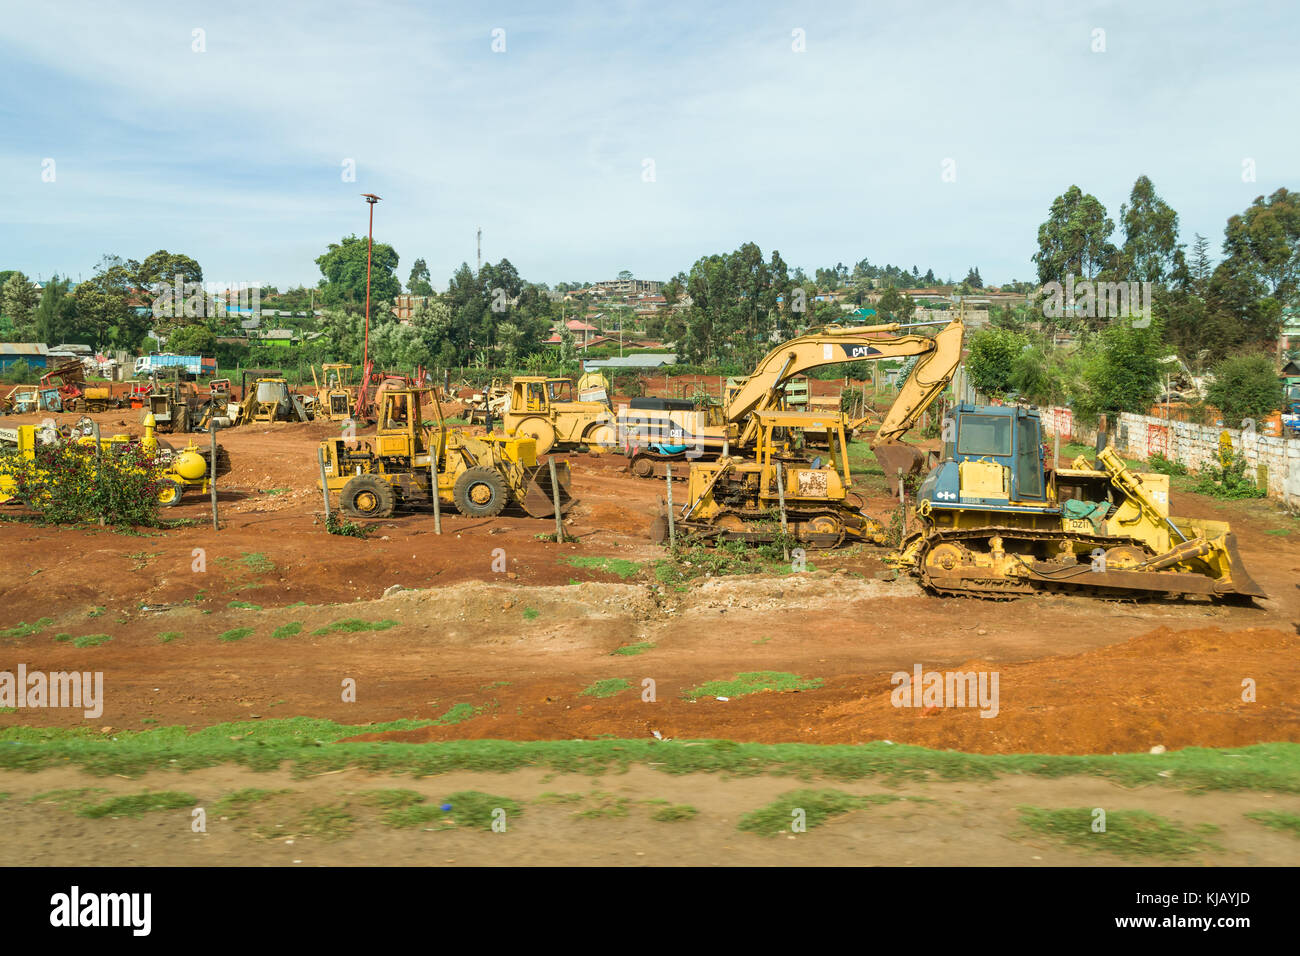 Several construction vehicles sit in an open yard by the roadside, Kenya, East Africa Stock Photo